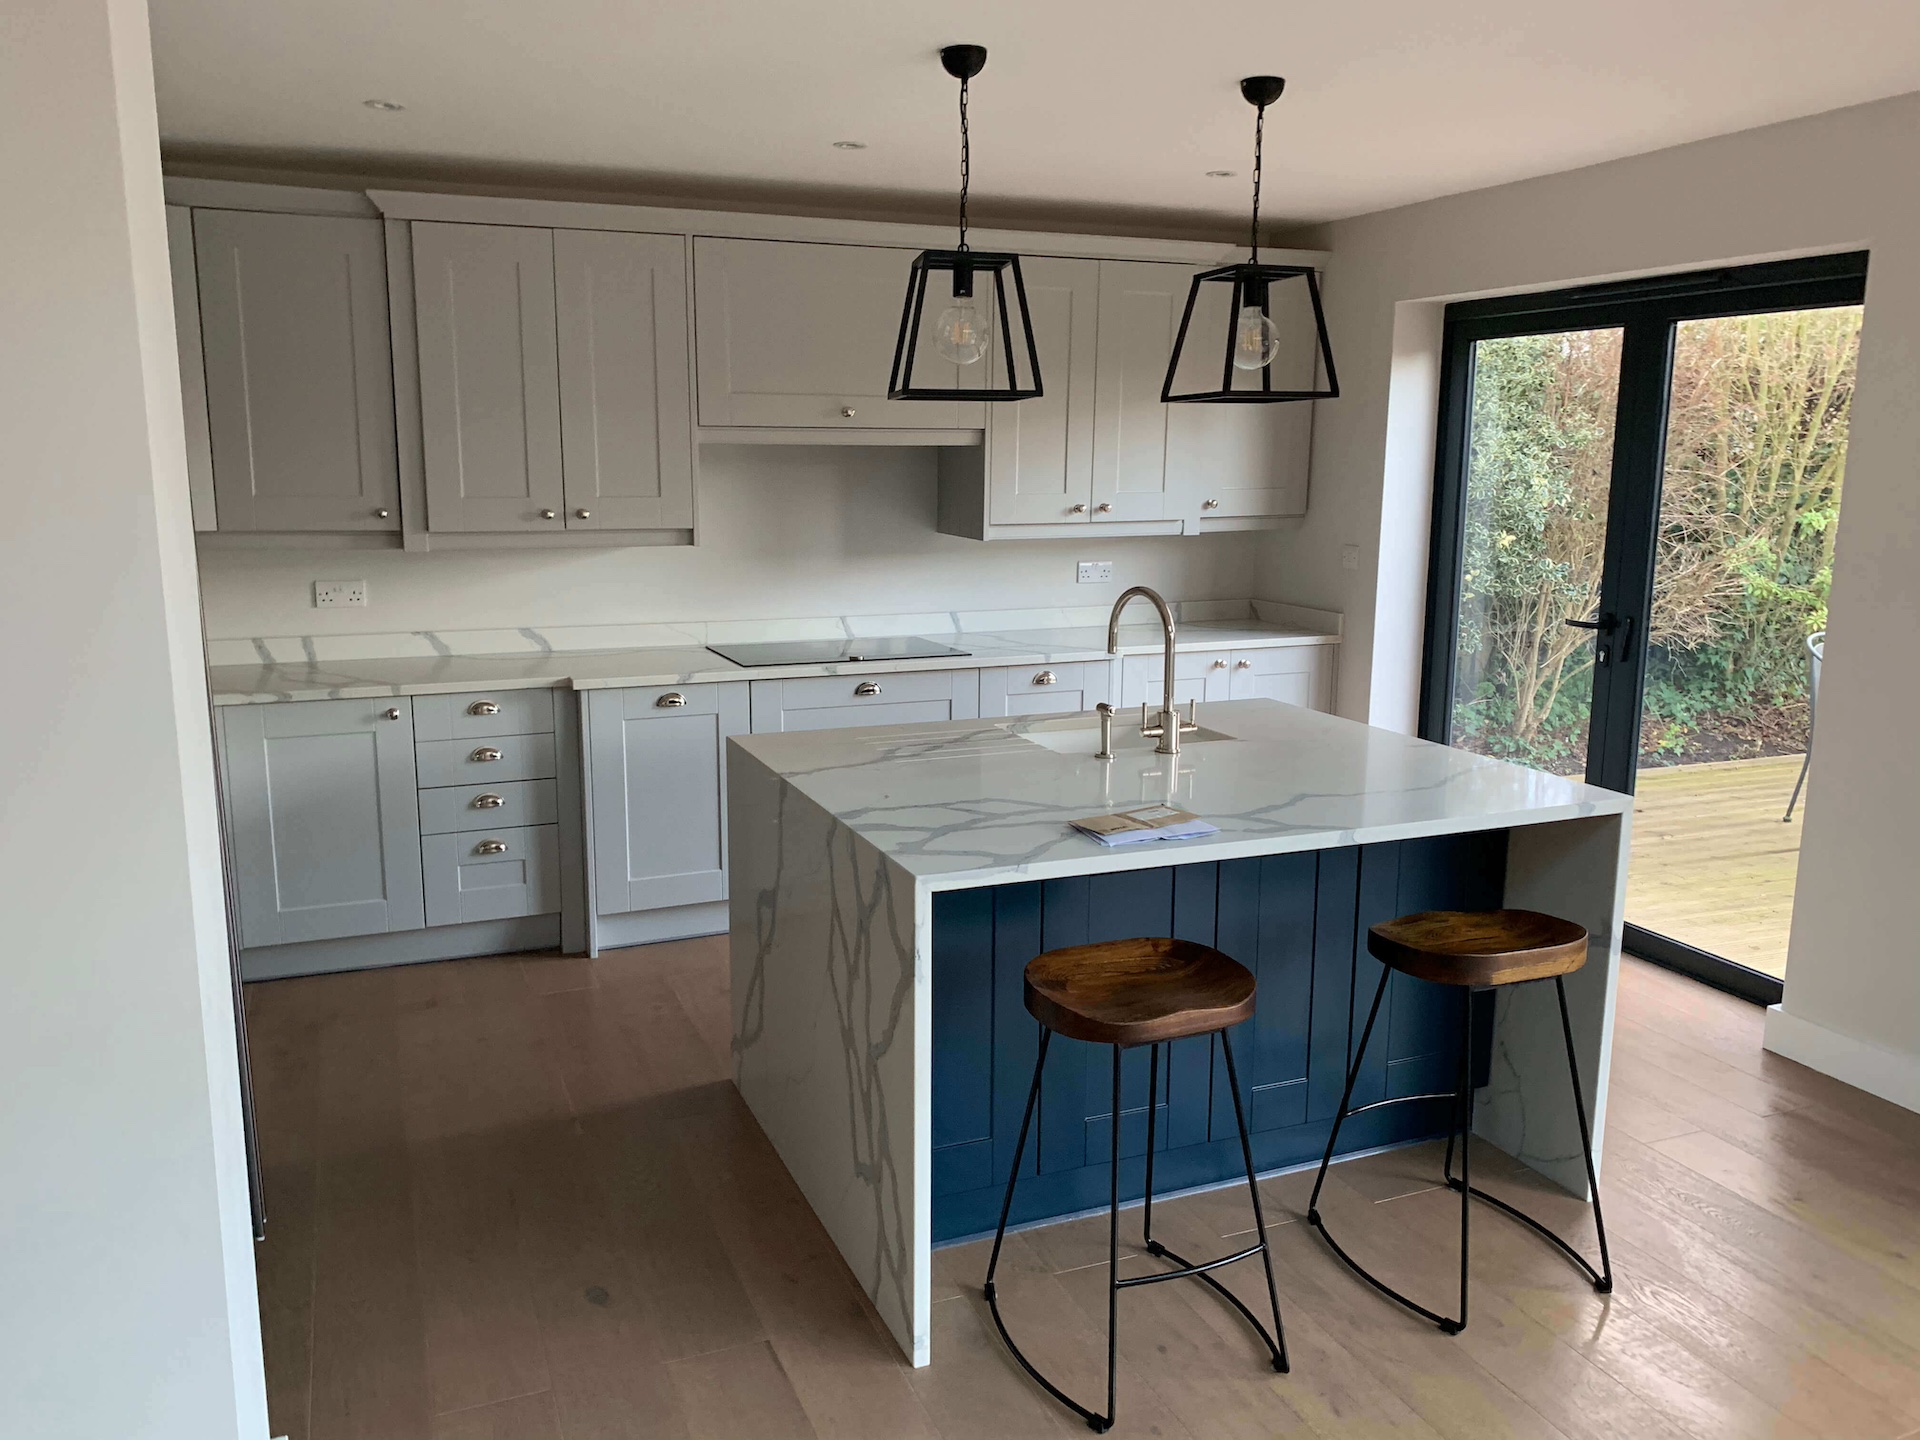 Spotless and modern kitchen in Battersea SW11, shining after an end of tenancy cleaning service by Cleaningsure, showcasing gleaming surfaces, sparkling appliances, and a clutter-free environment.